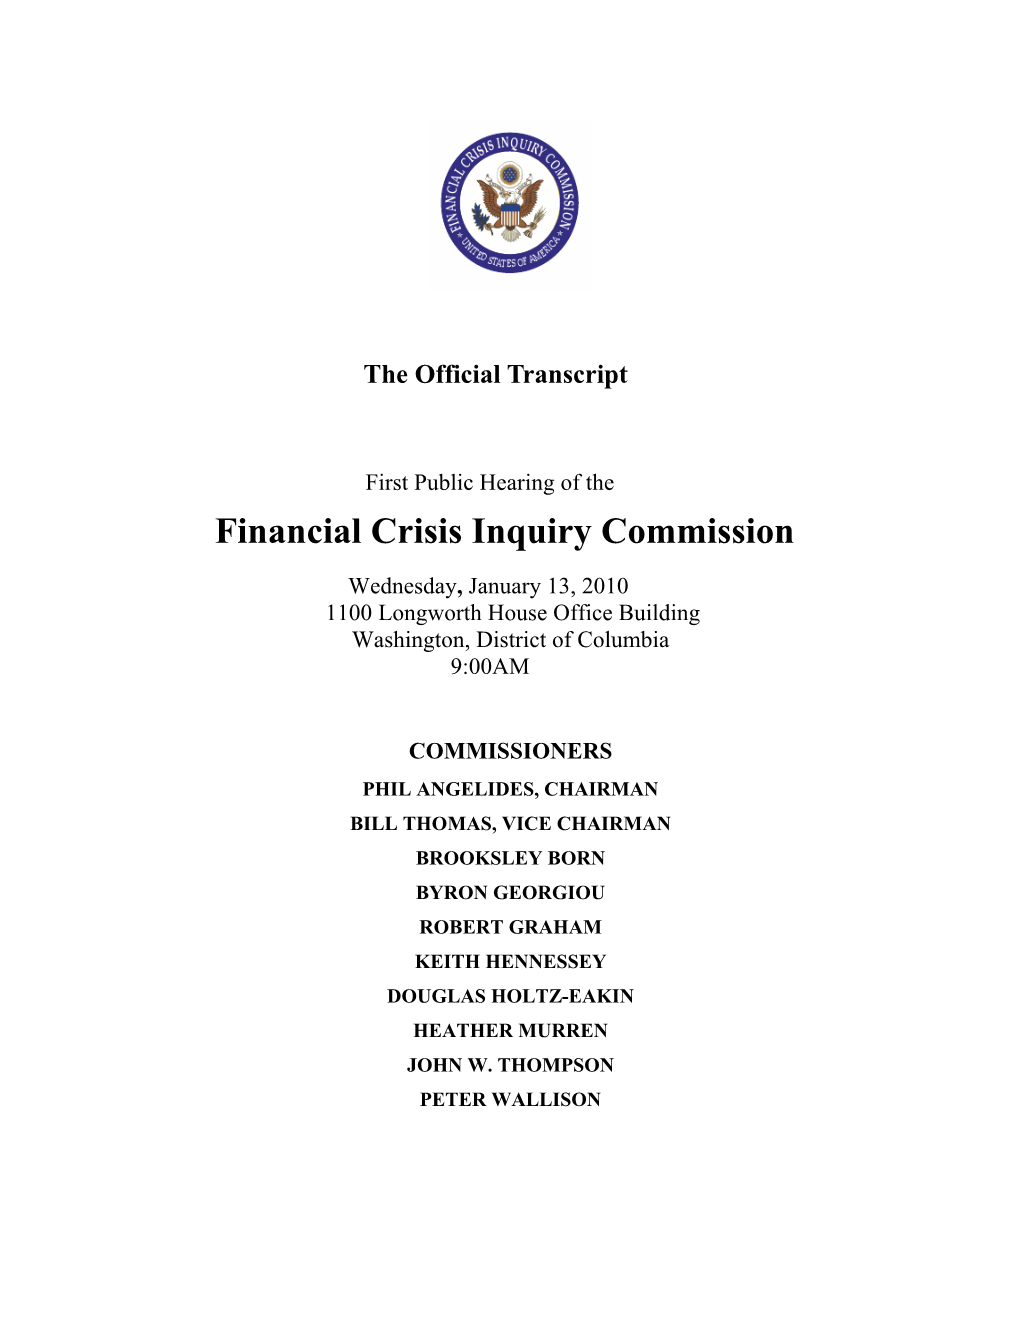 First Public Hearing of the Financial Crisis Inquiry Commission